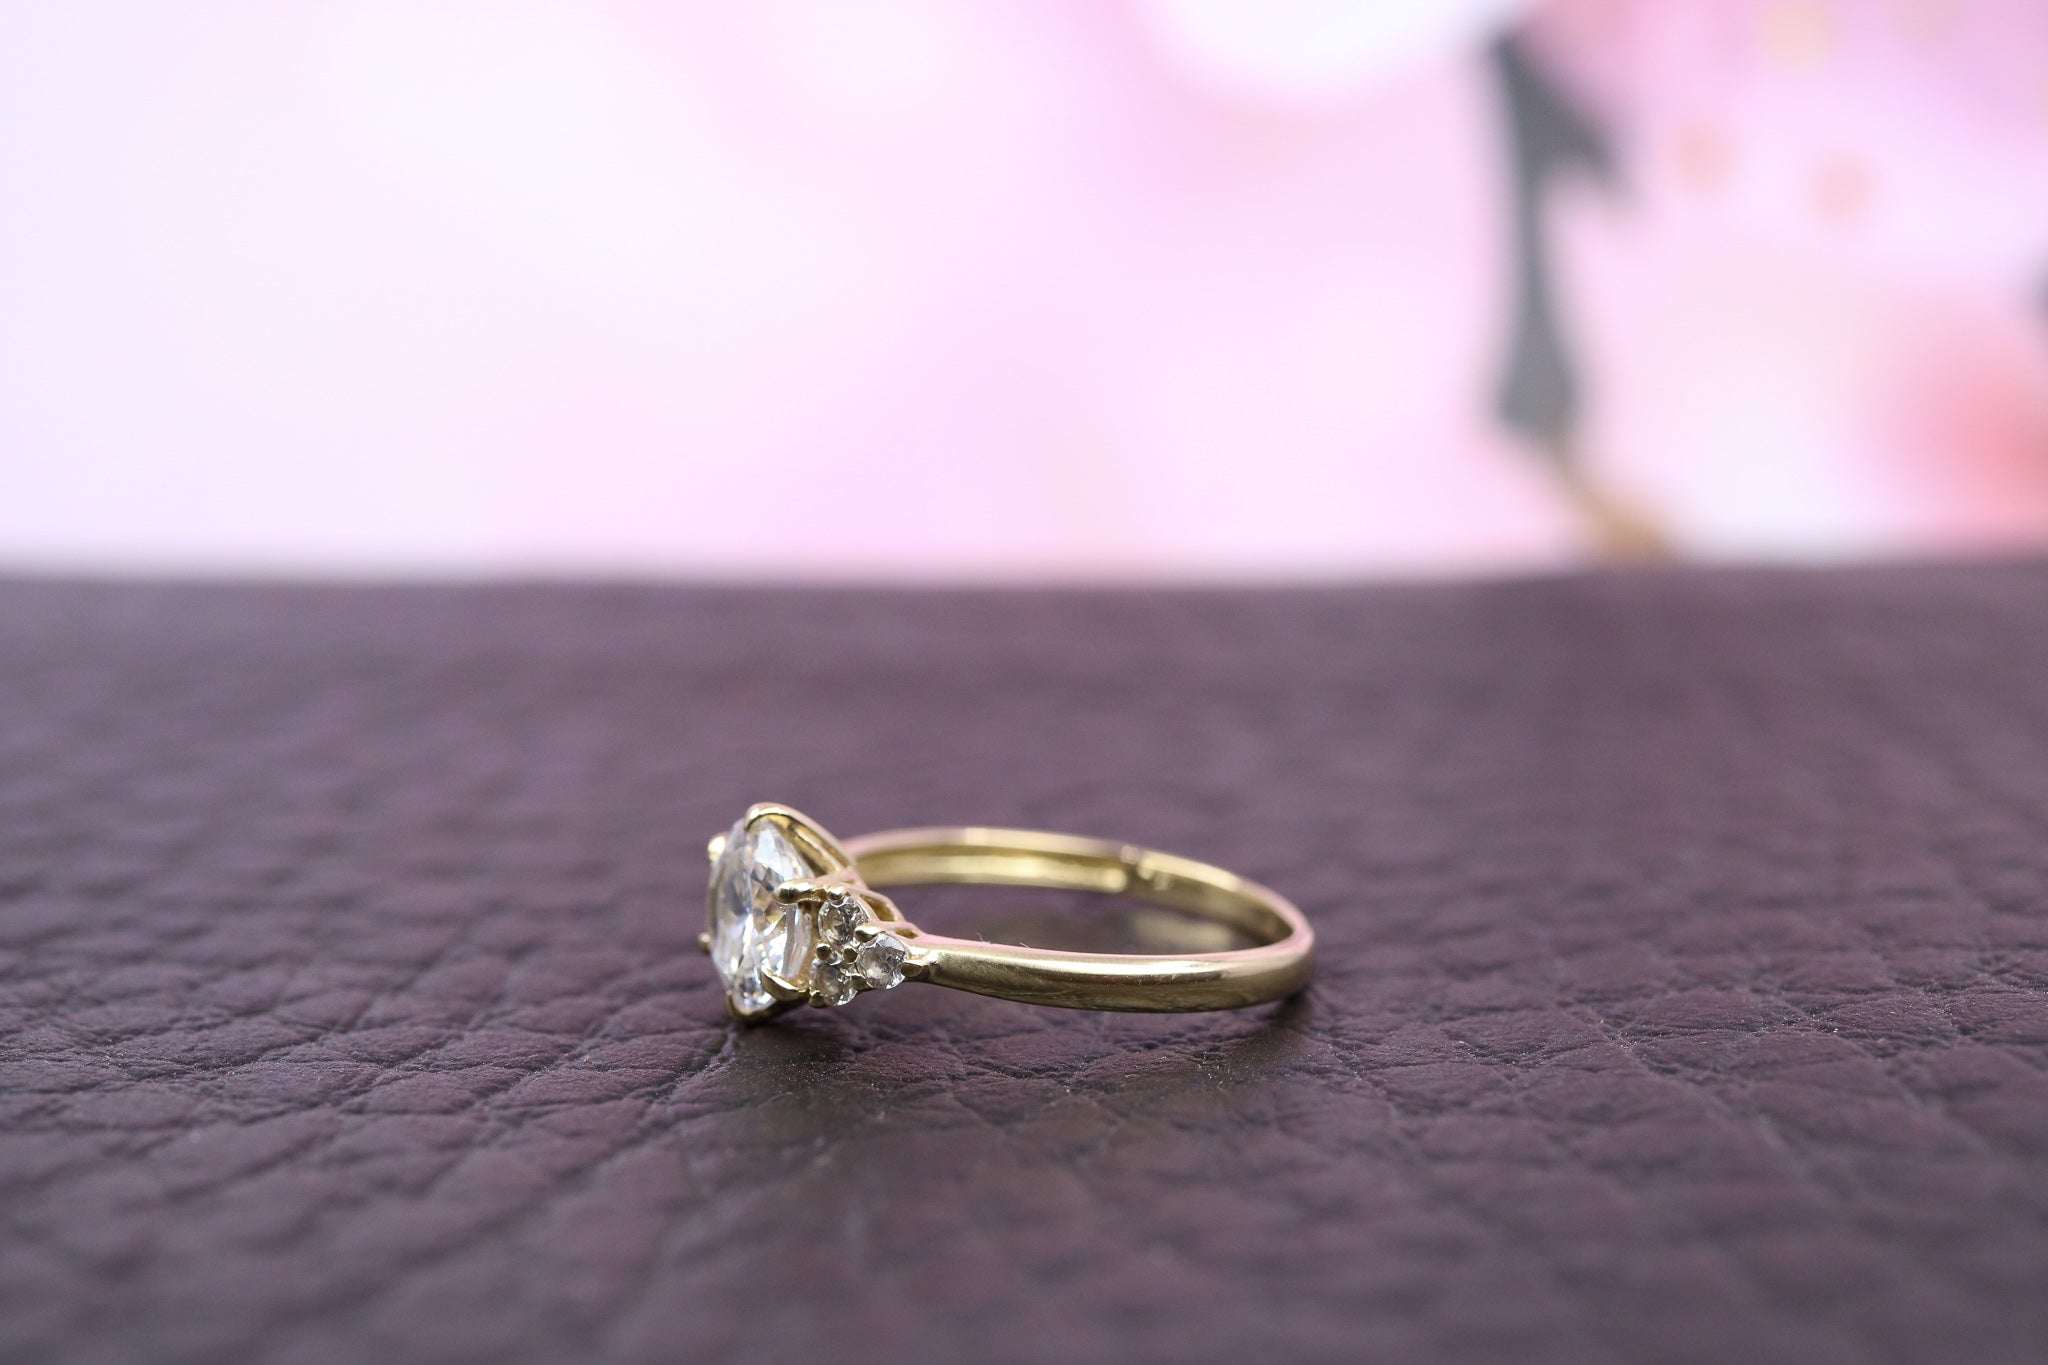 14ct Yellow Gold Cubic Zirconia Ring - HJ2478 - Hallmark Jewellers Formby & The Jewellers Bench Widnes